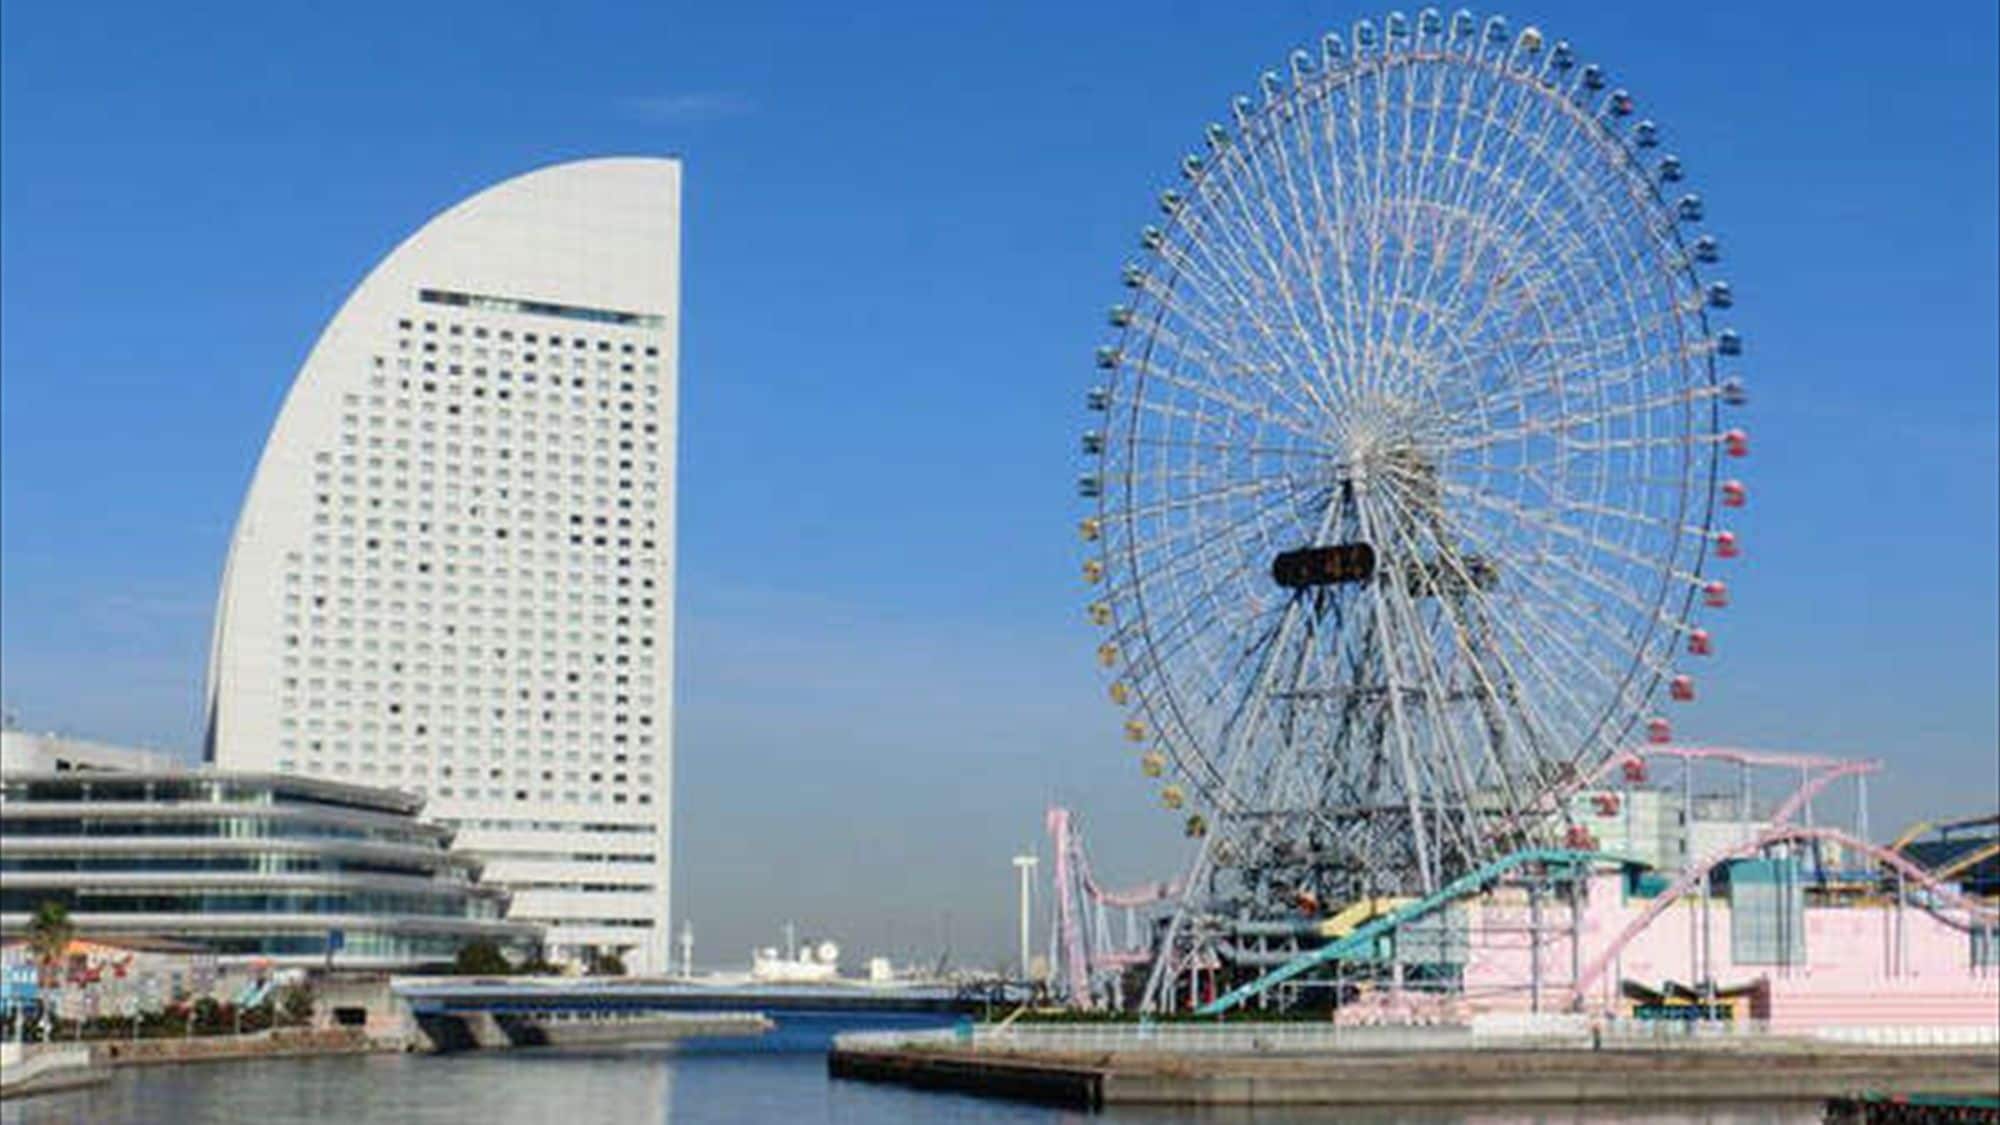 Minato Mirai Day scenery Not only the night view, but also the combination with the blue sky is attractive.